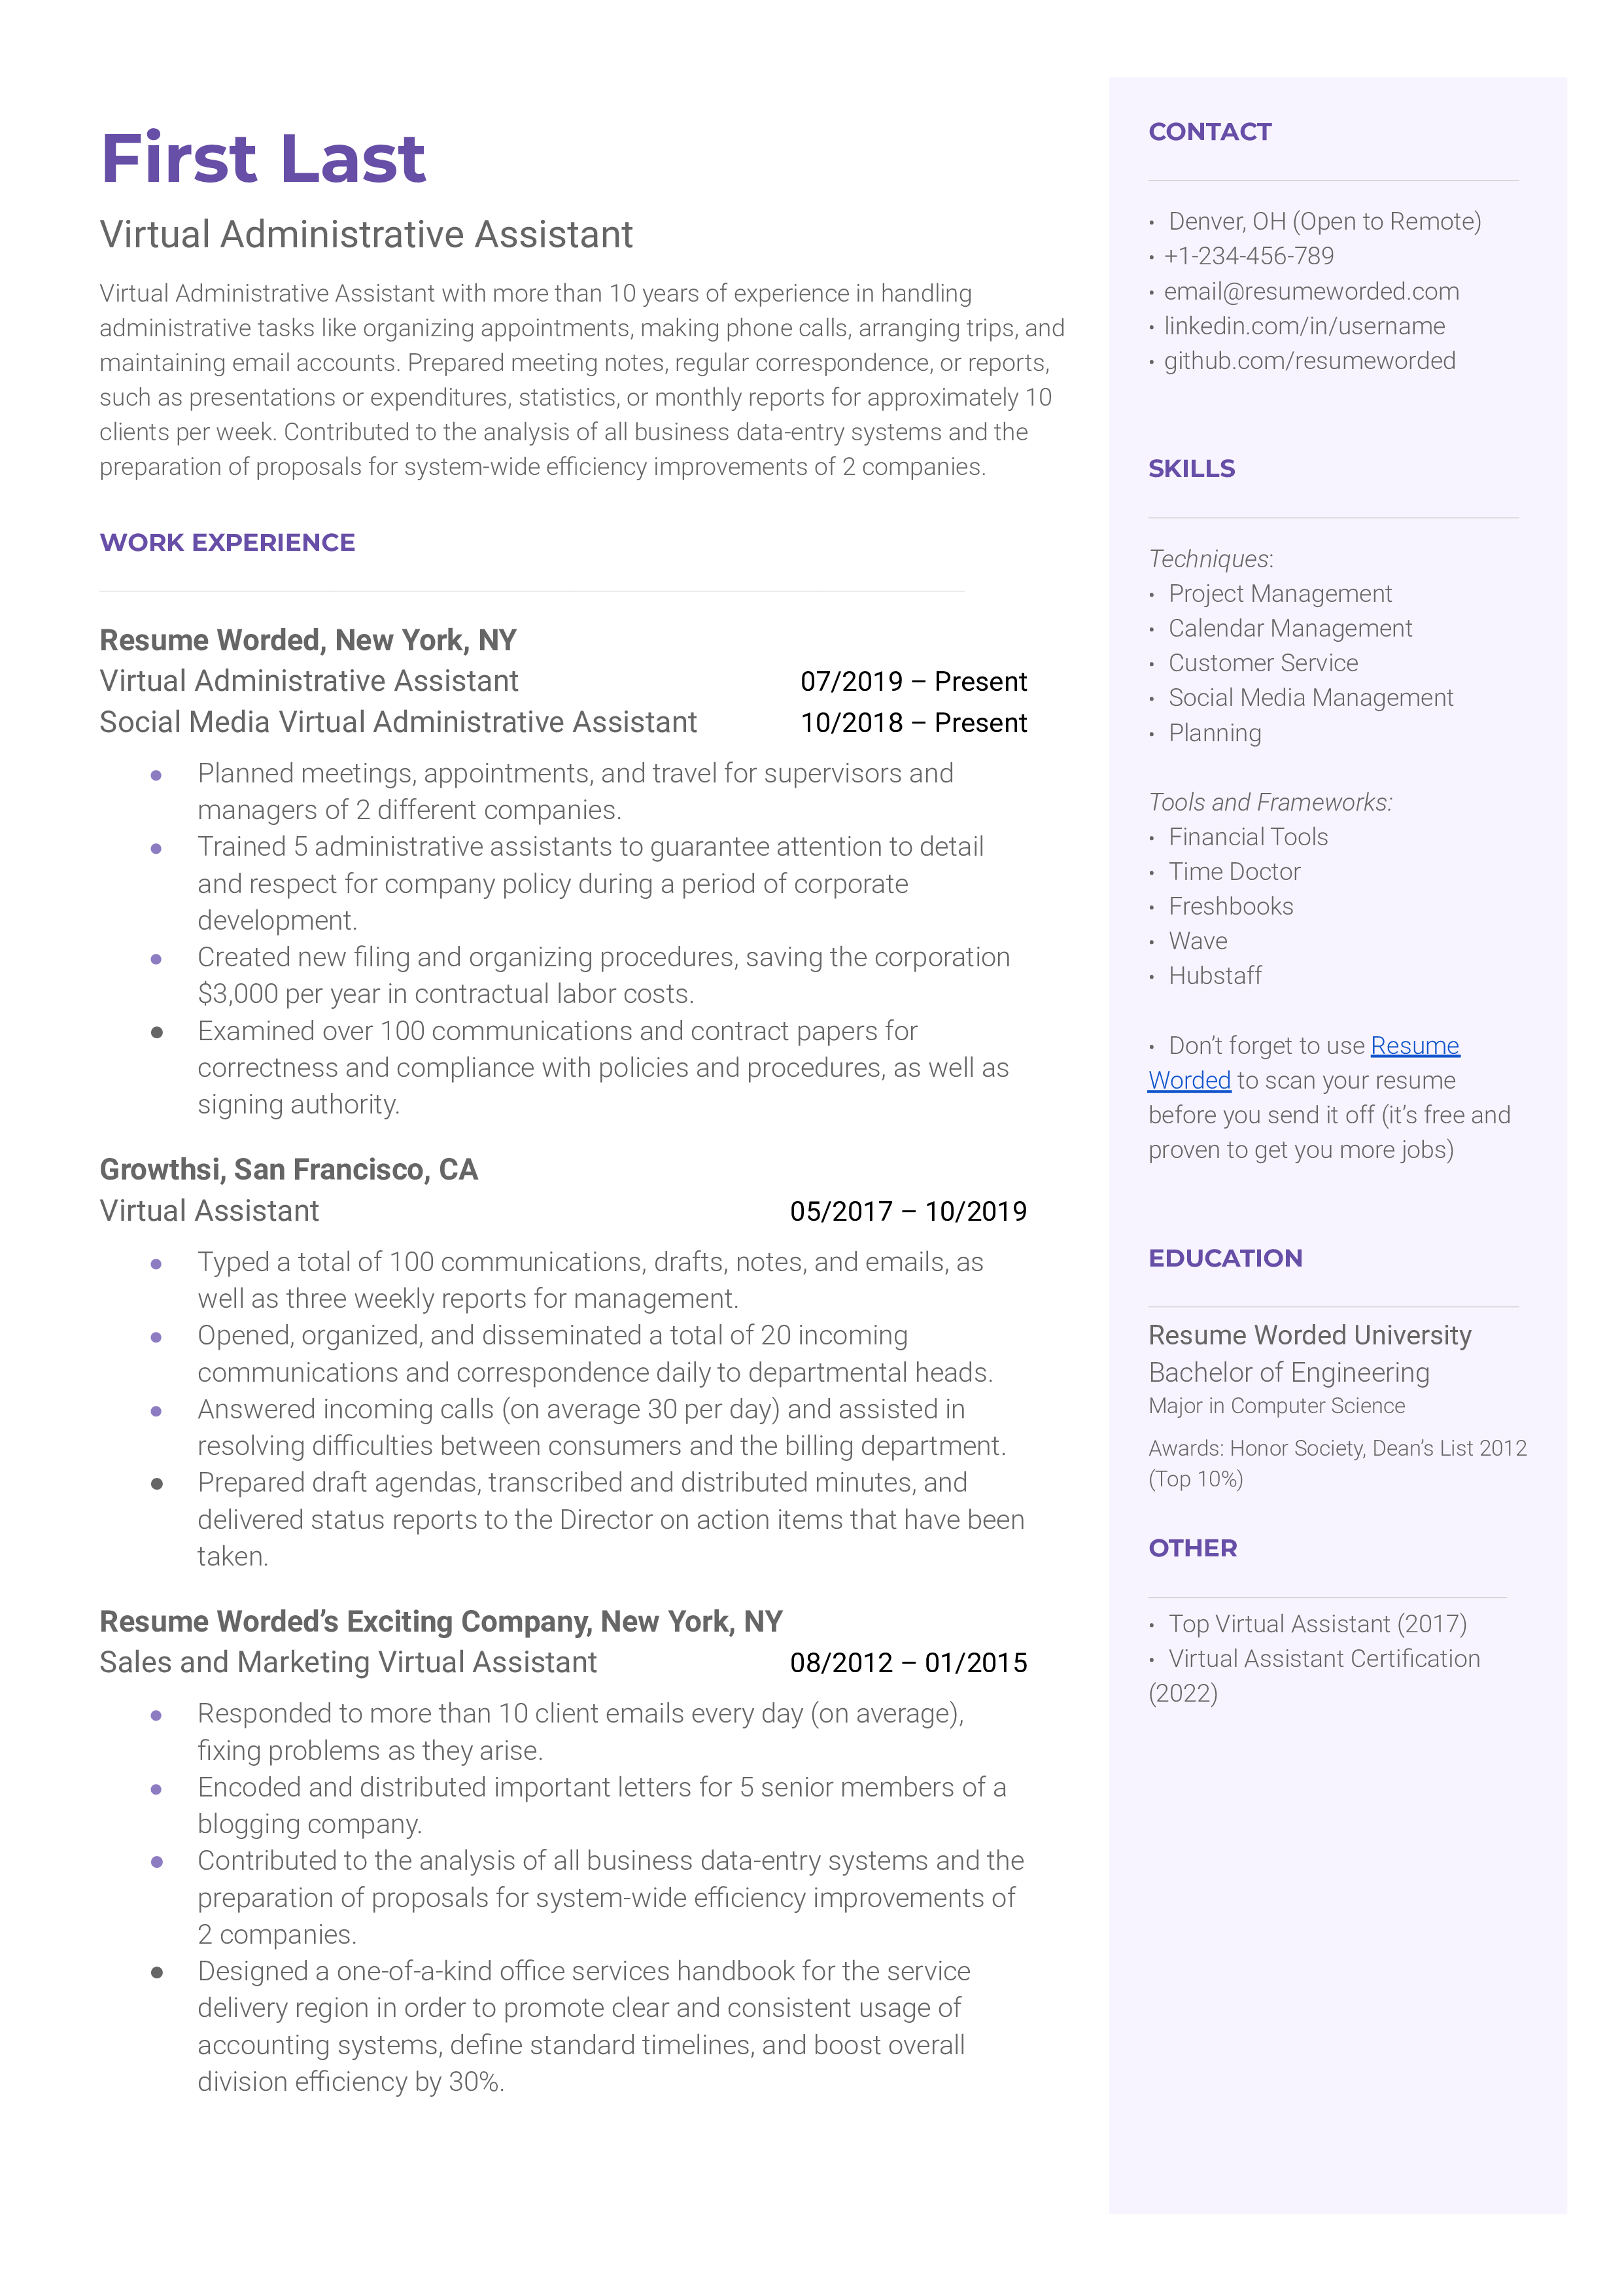 Virtual Administrative Assistant Resume Template + Example